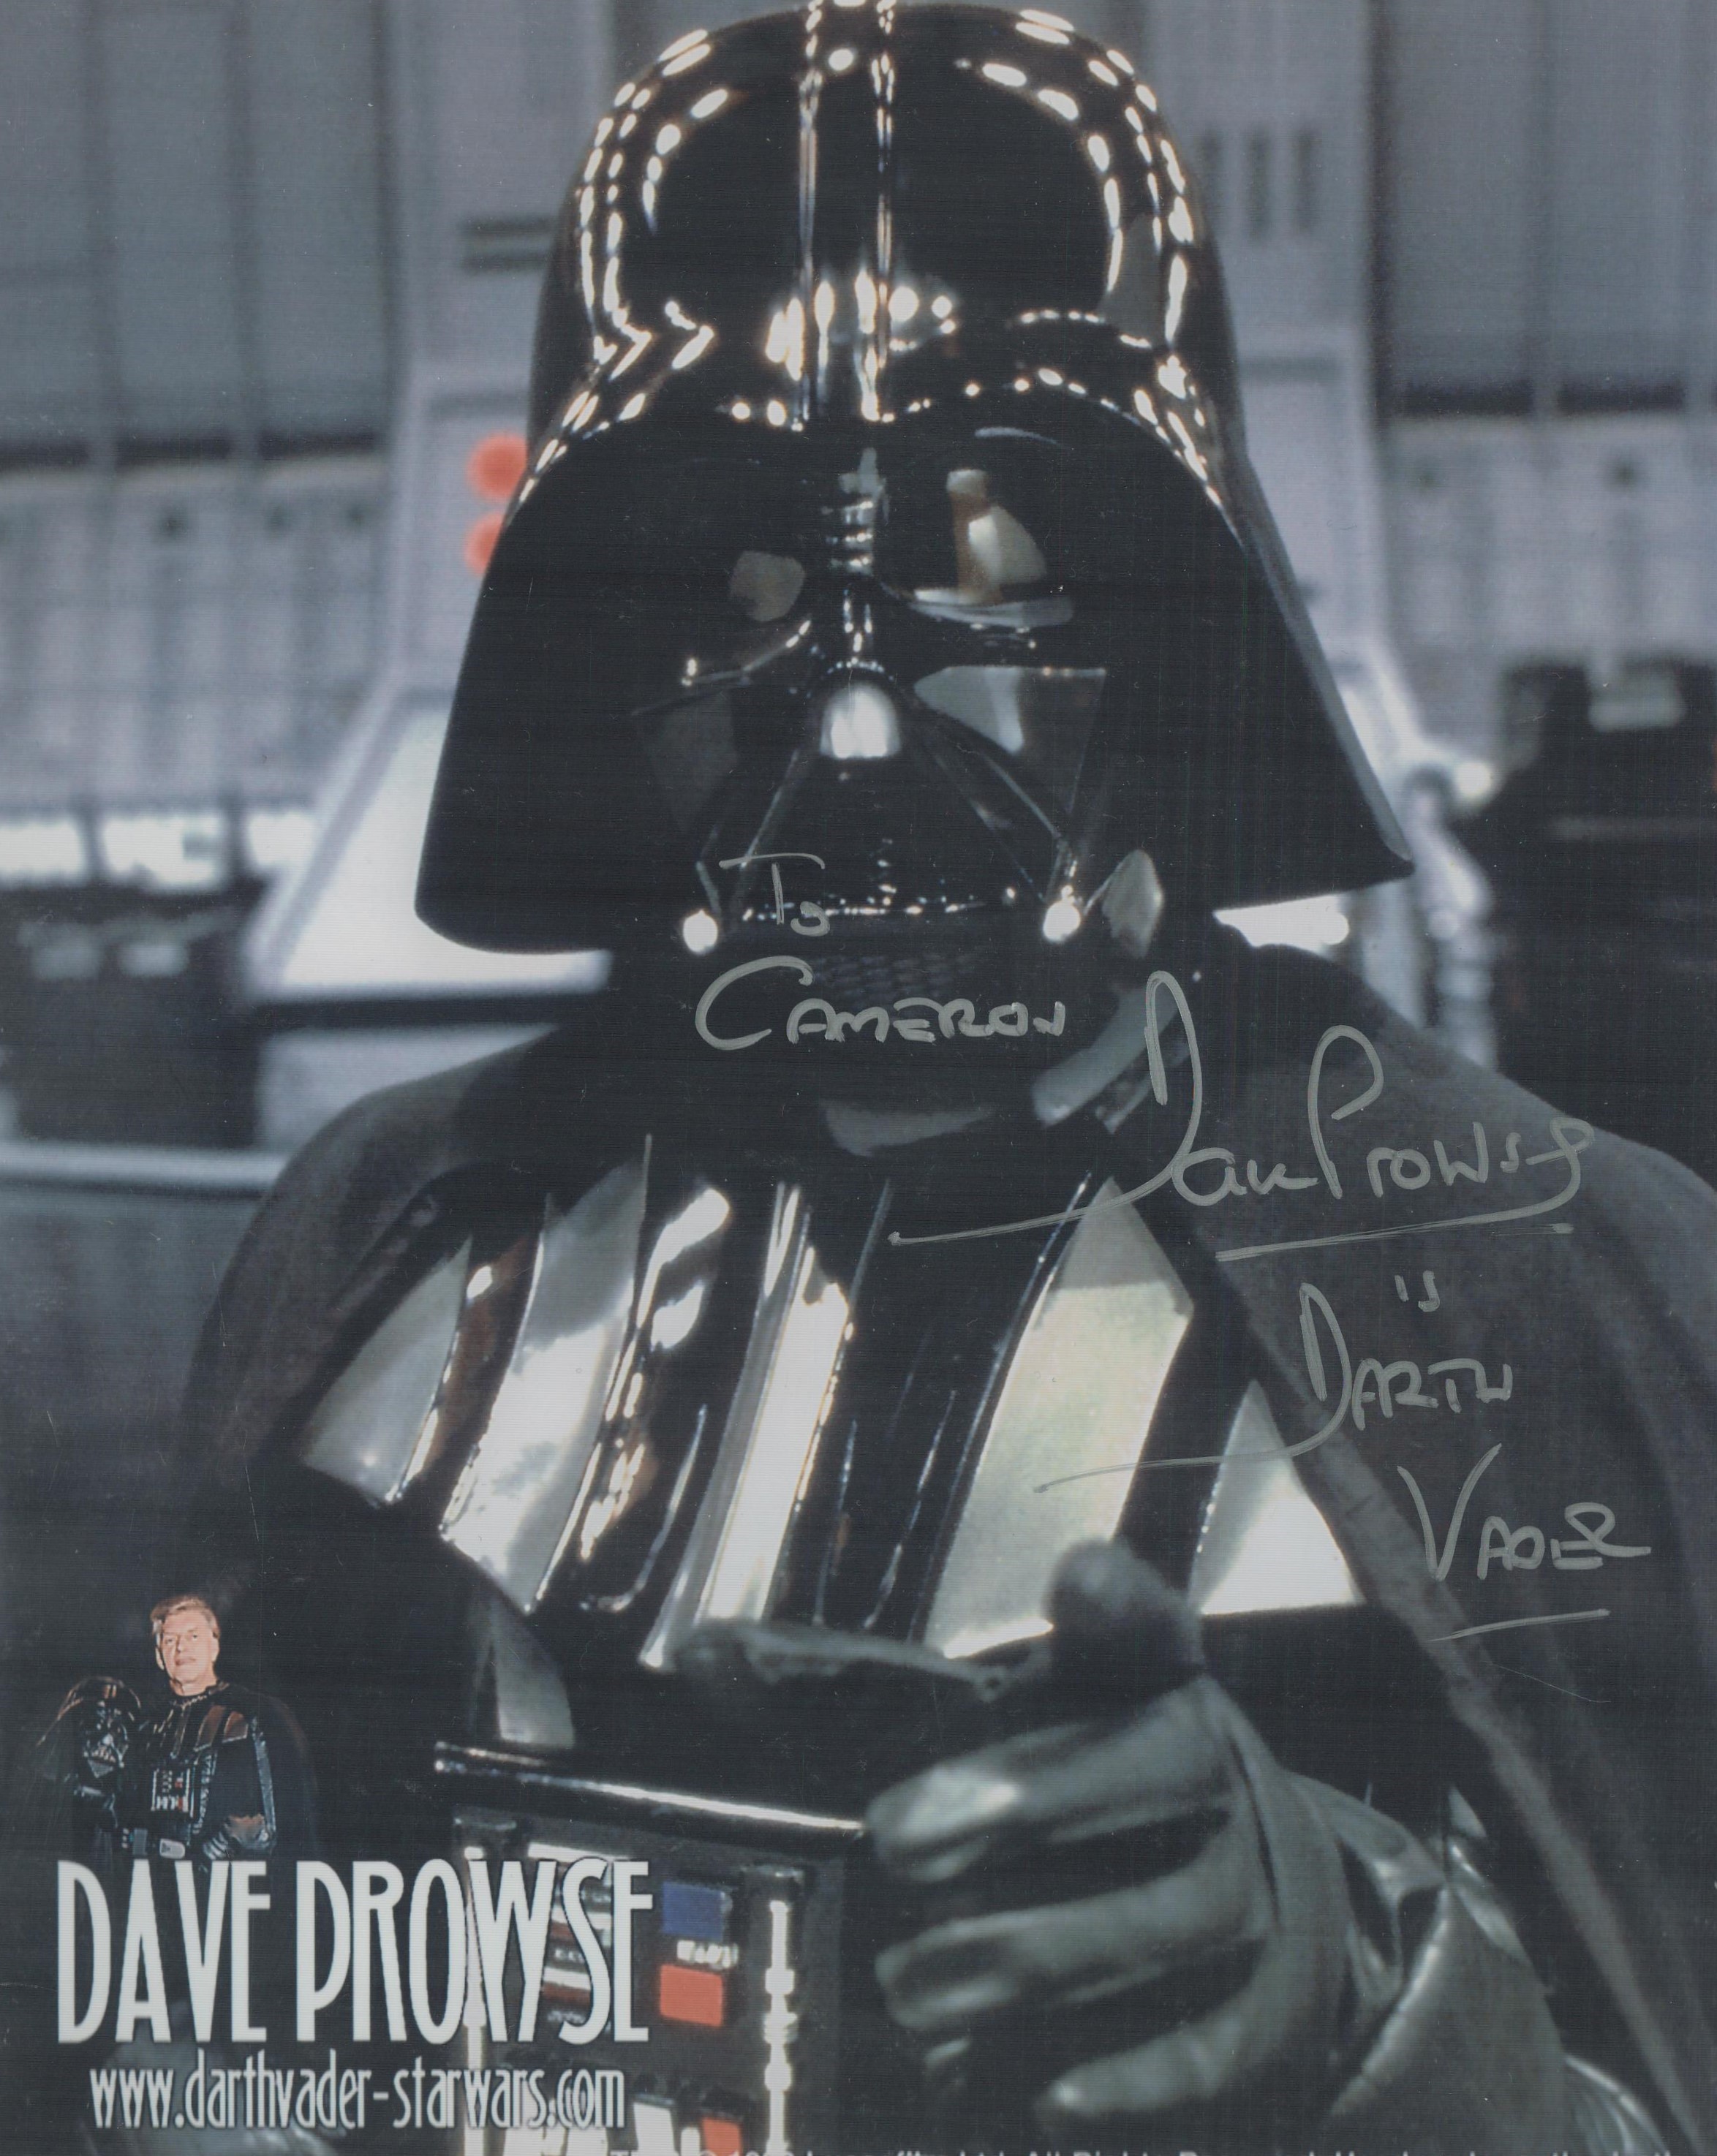 Dave Prowse signed 10x8 inch Darth Vader Star Wars colour promo photo. Dedicated. Good condition.